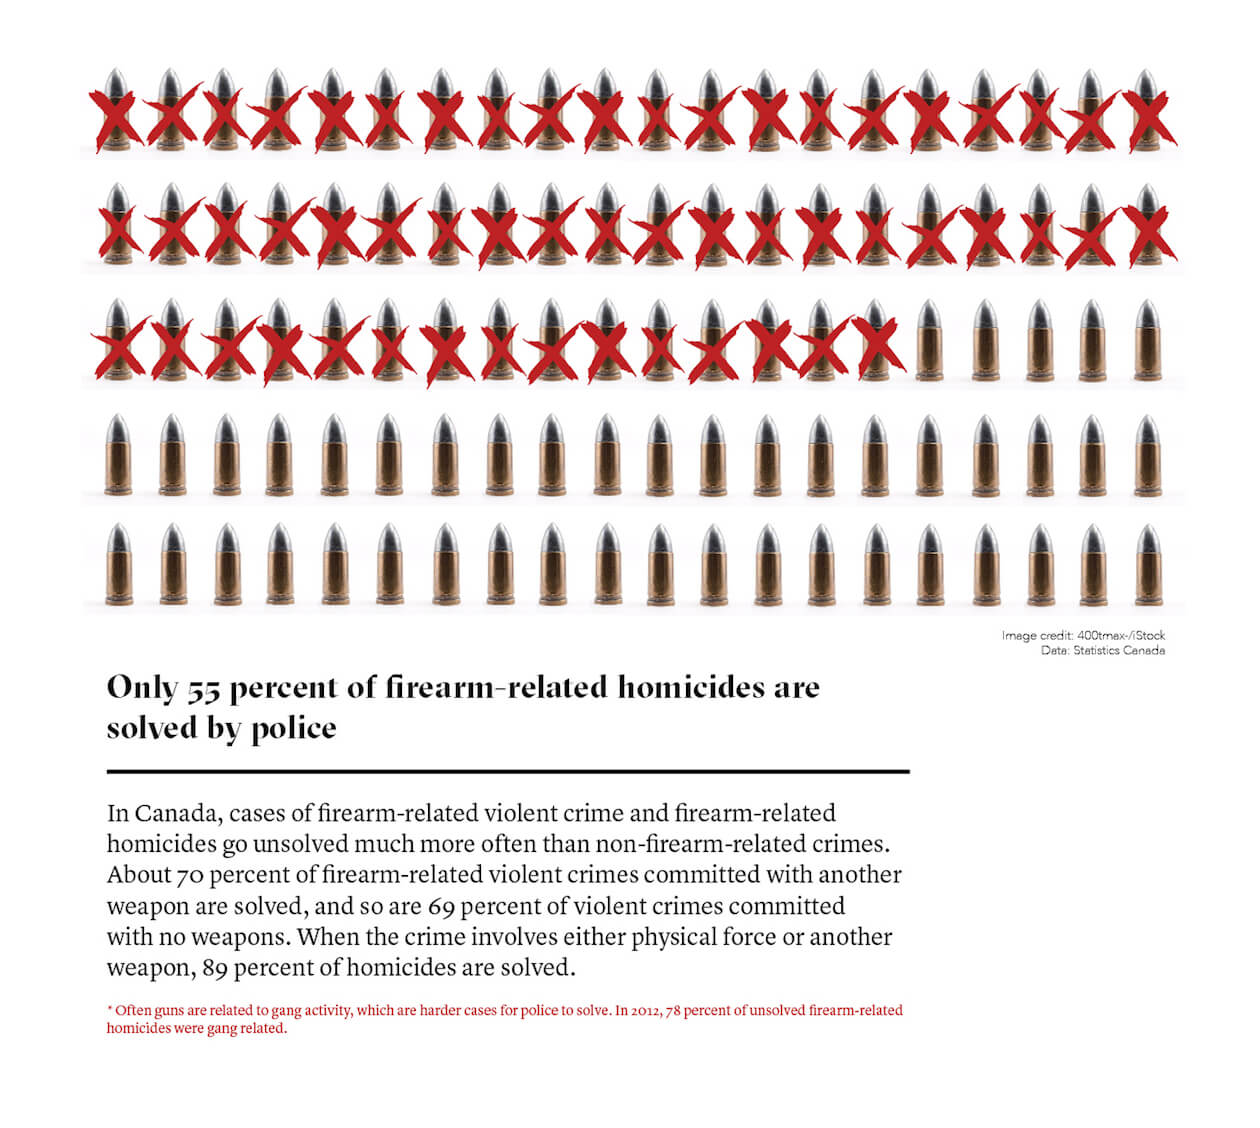 Only 55% of firearm-related homicides are solved by police